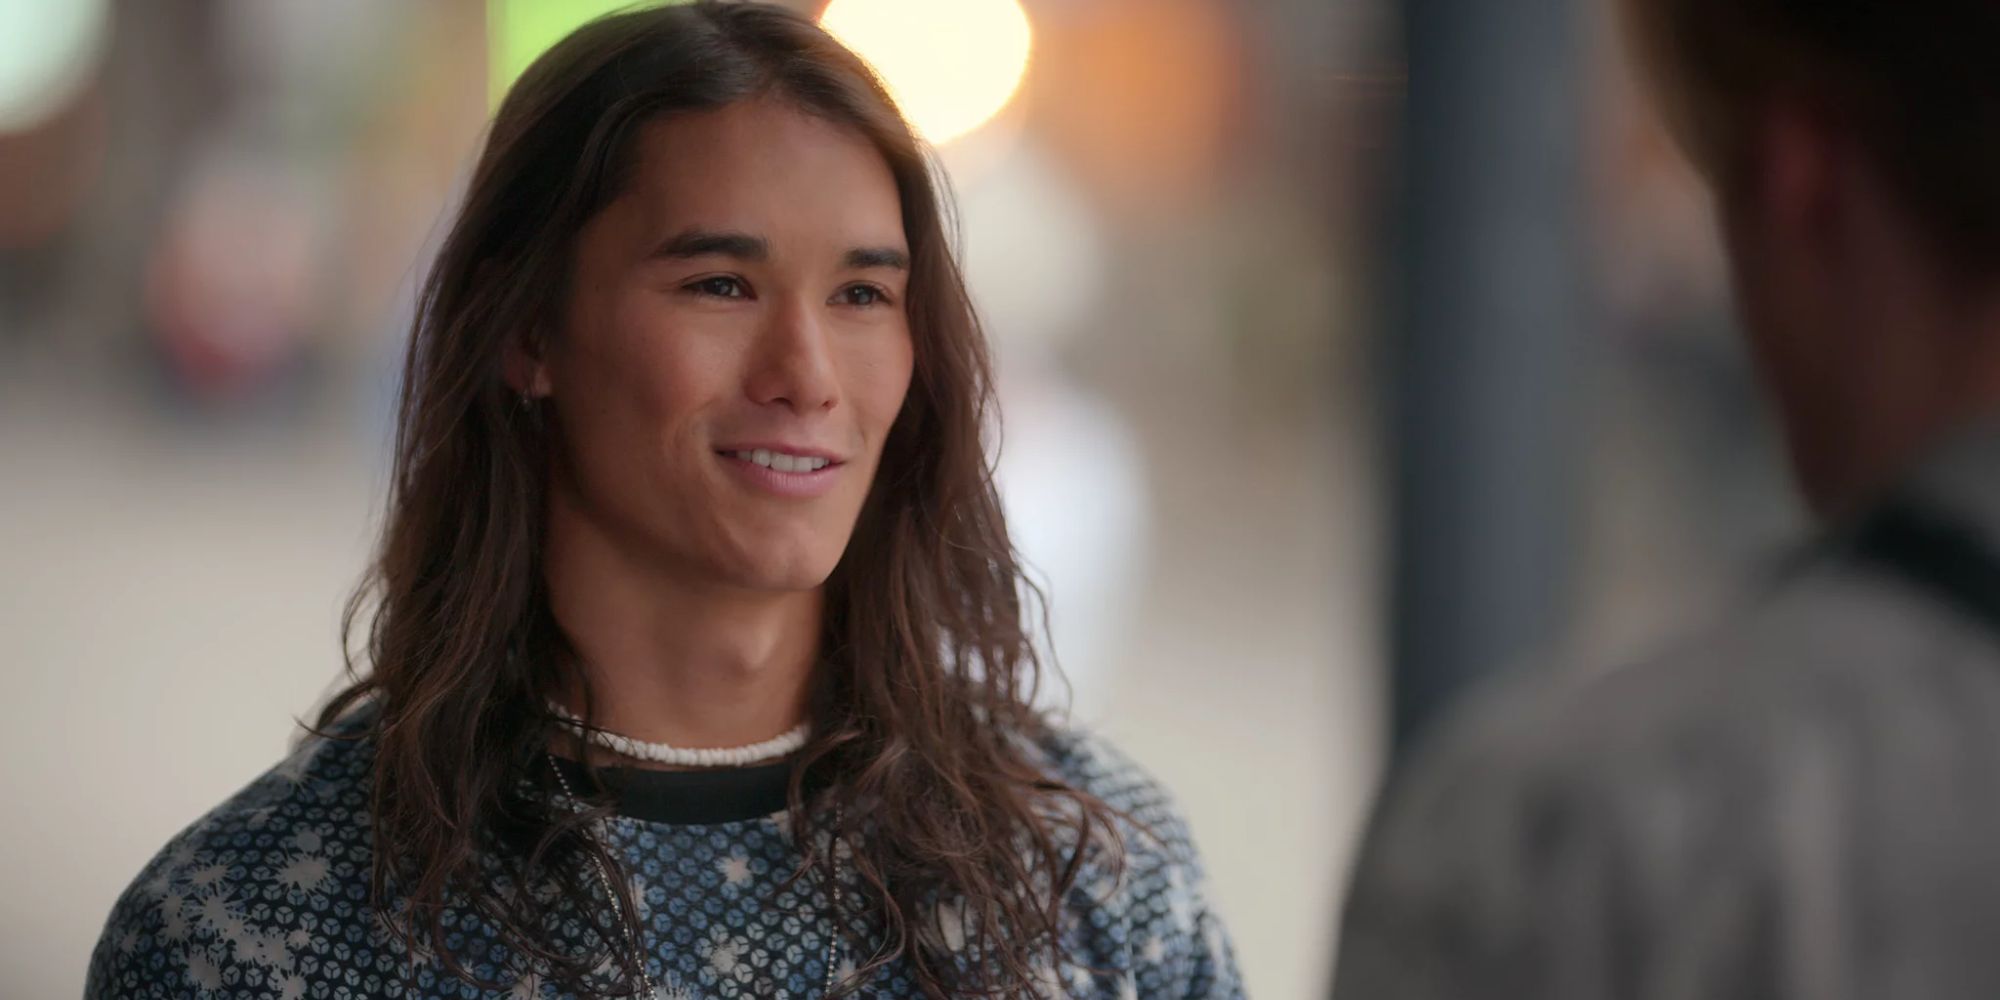 Booboo Stewart as Willie smiling at someone off-camera in Julie and the Phantoms